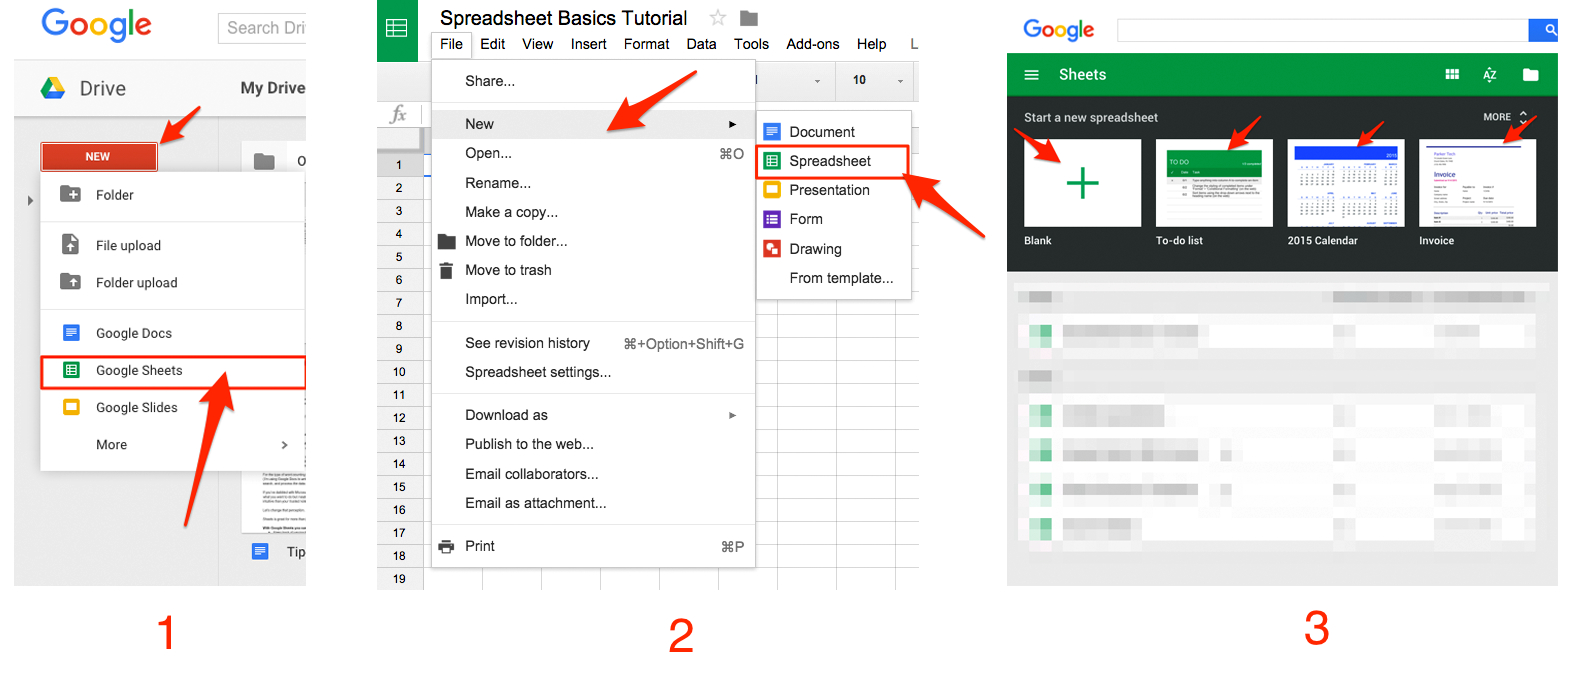 Google Sheets 101: The Beginner's Guide To Online Spreadsheets   The ... Or Create A Spreadsheet